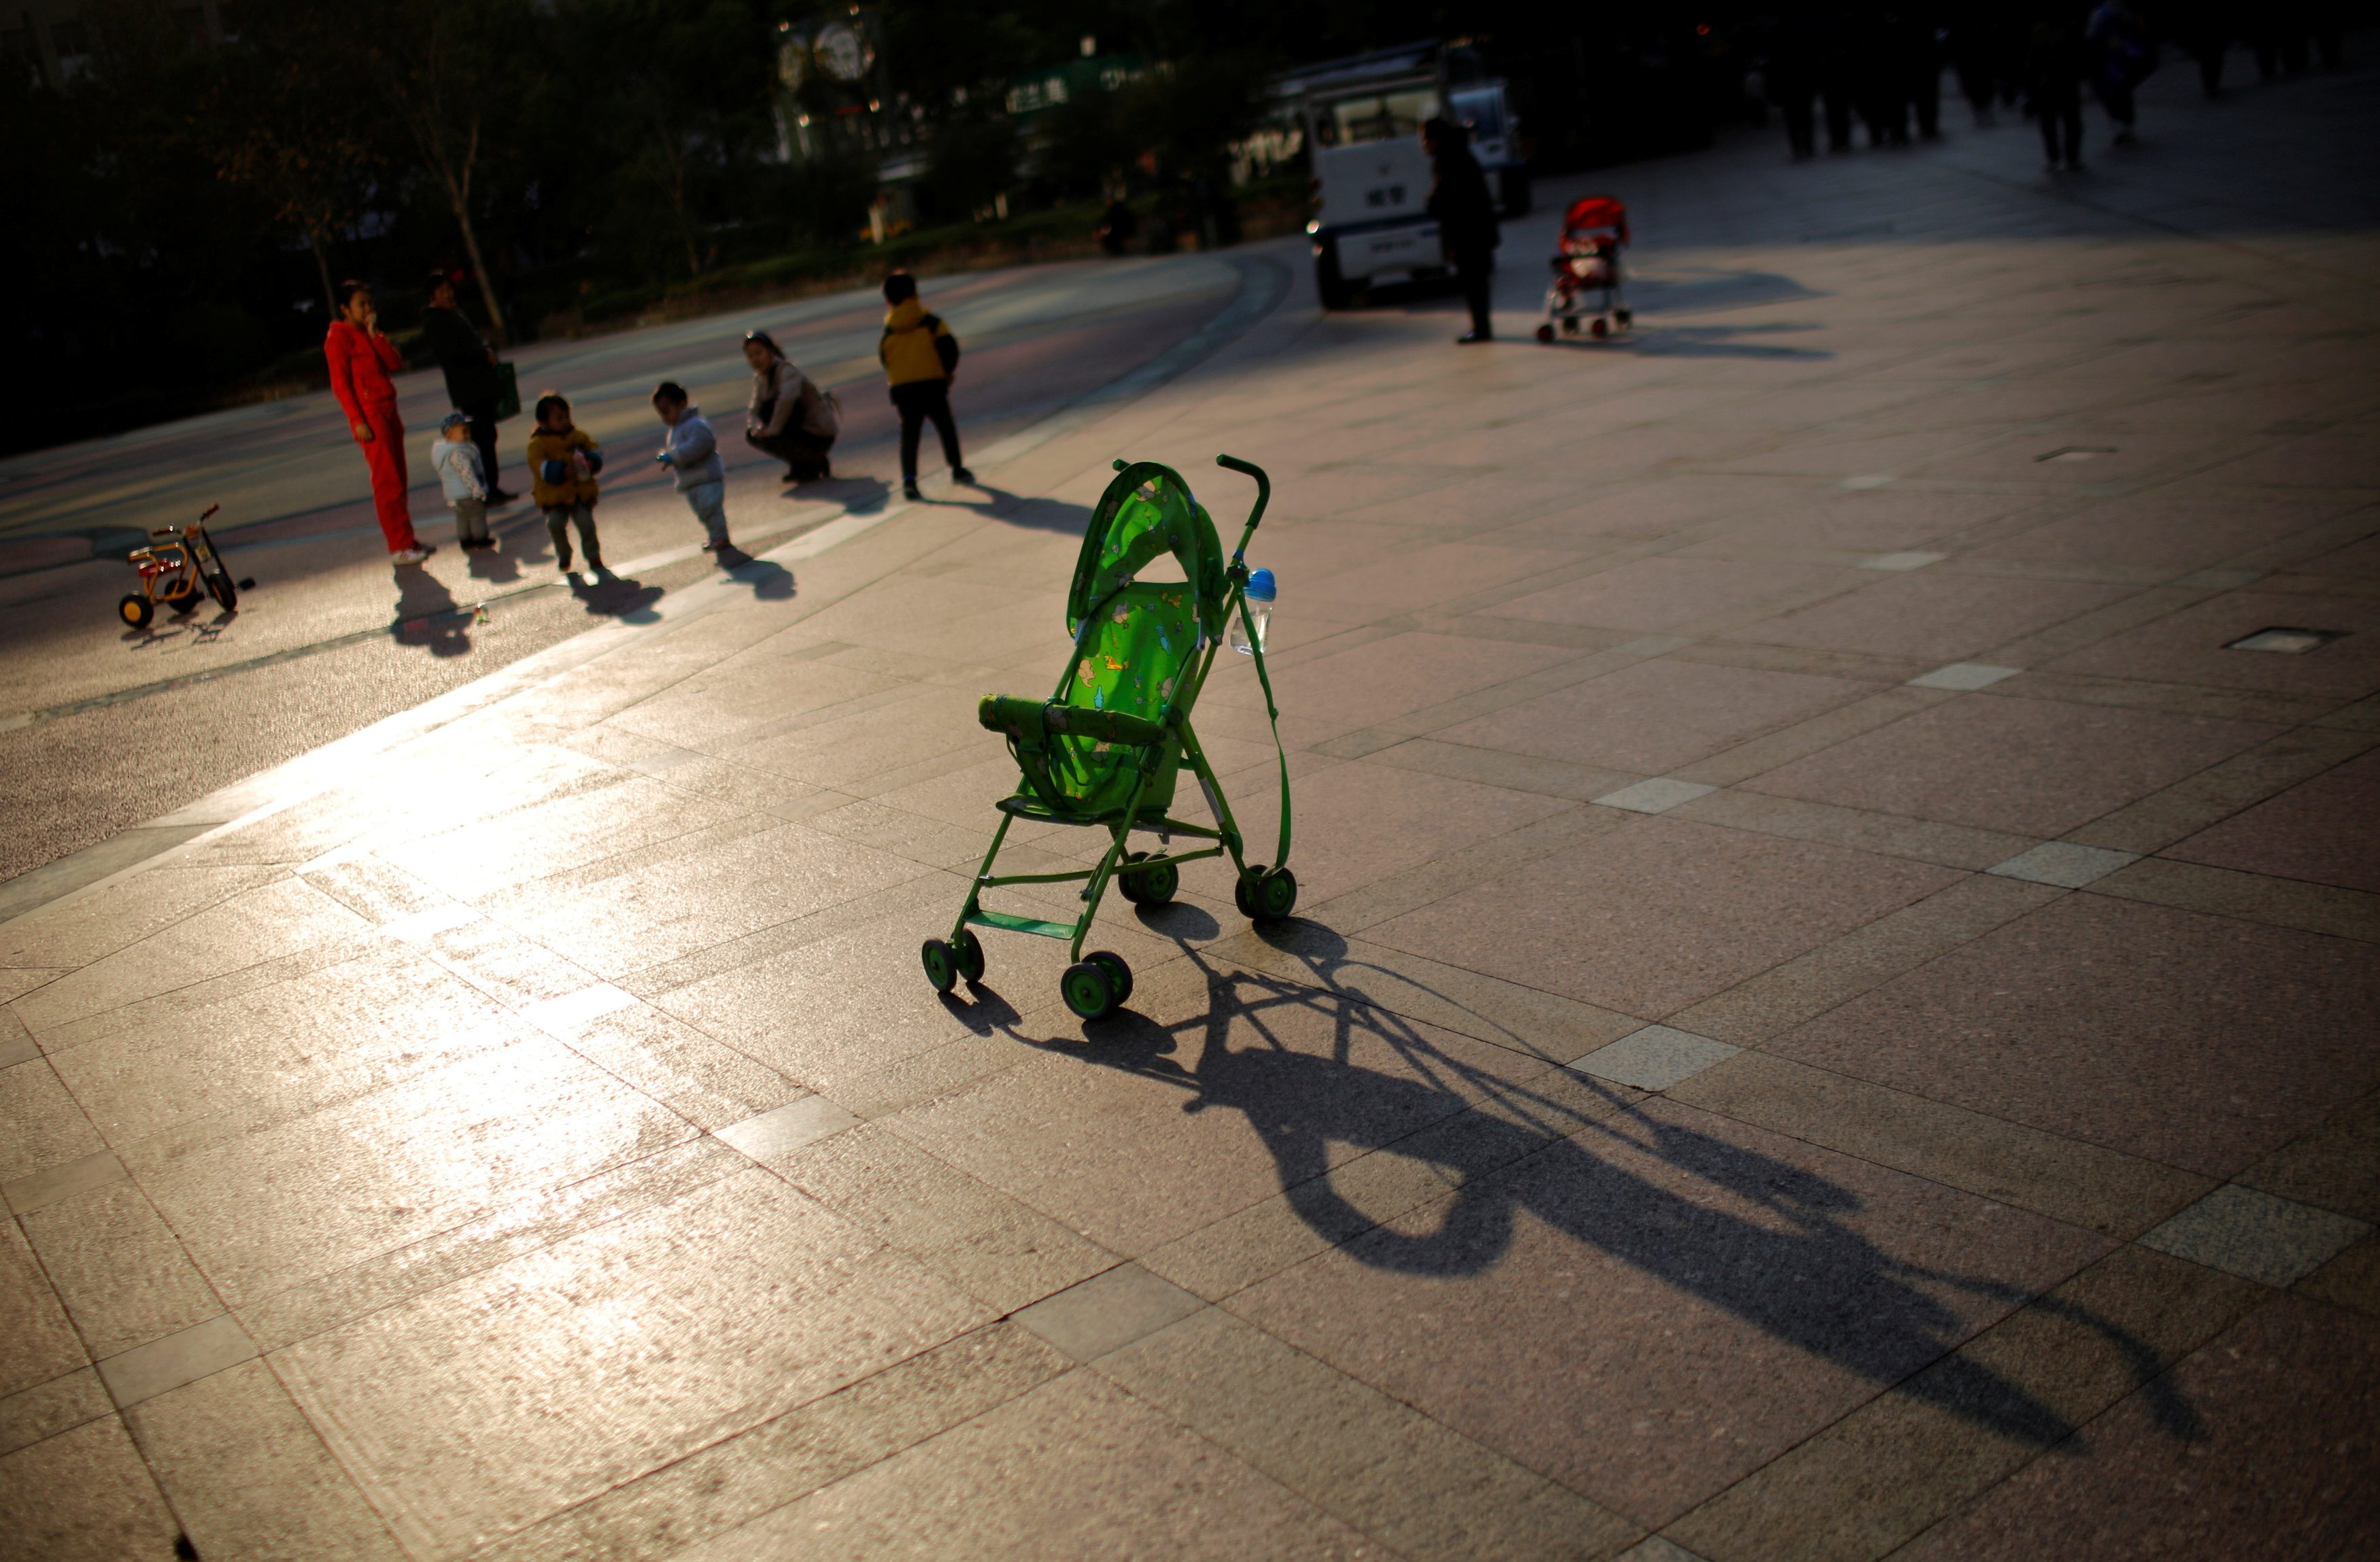 China drafts law to punish parents for children’s bad behavior